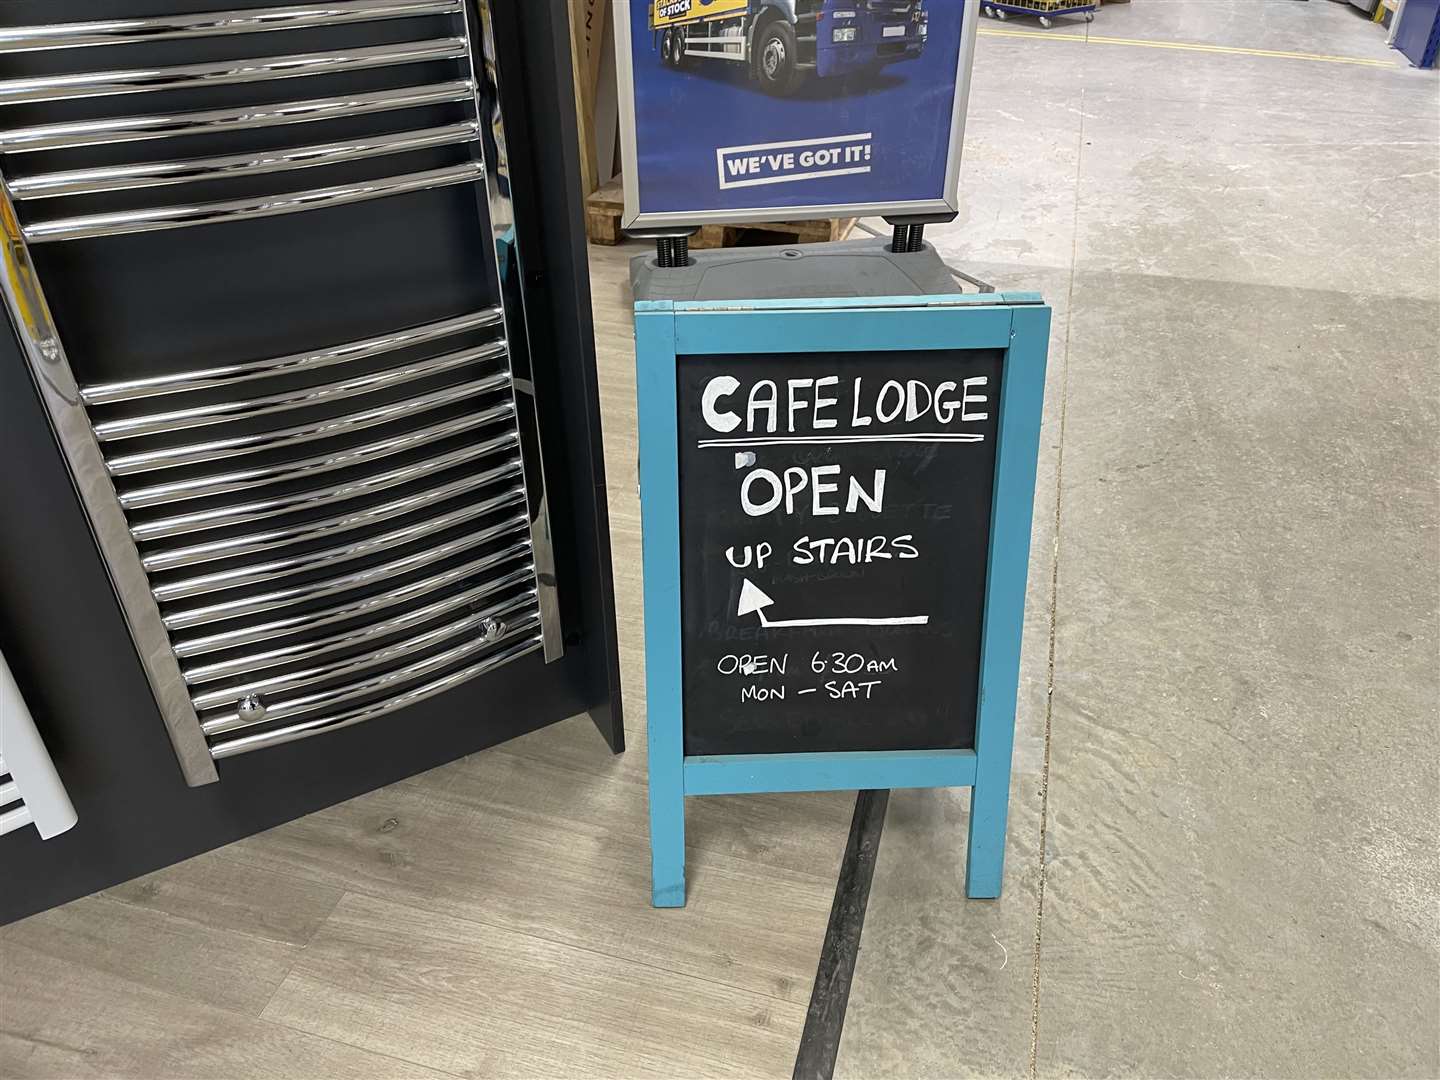 Café Lodge is upstairs in Selco Builders Warehouse